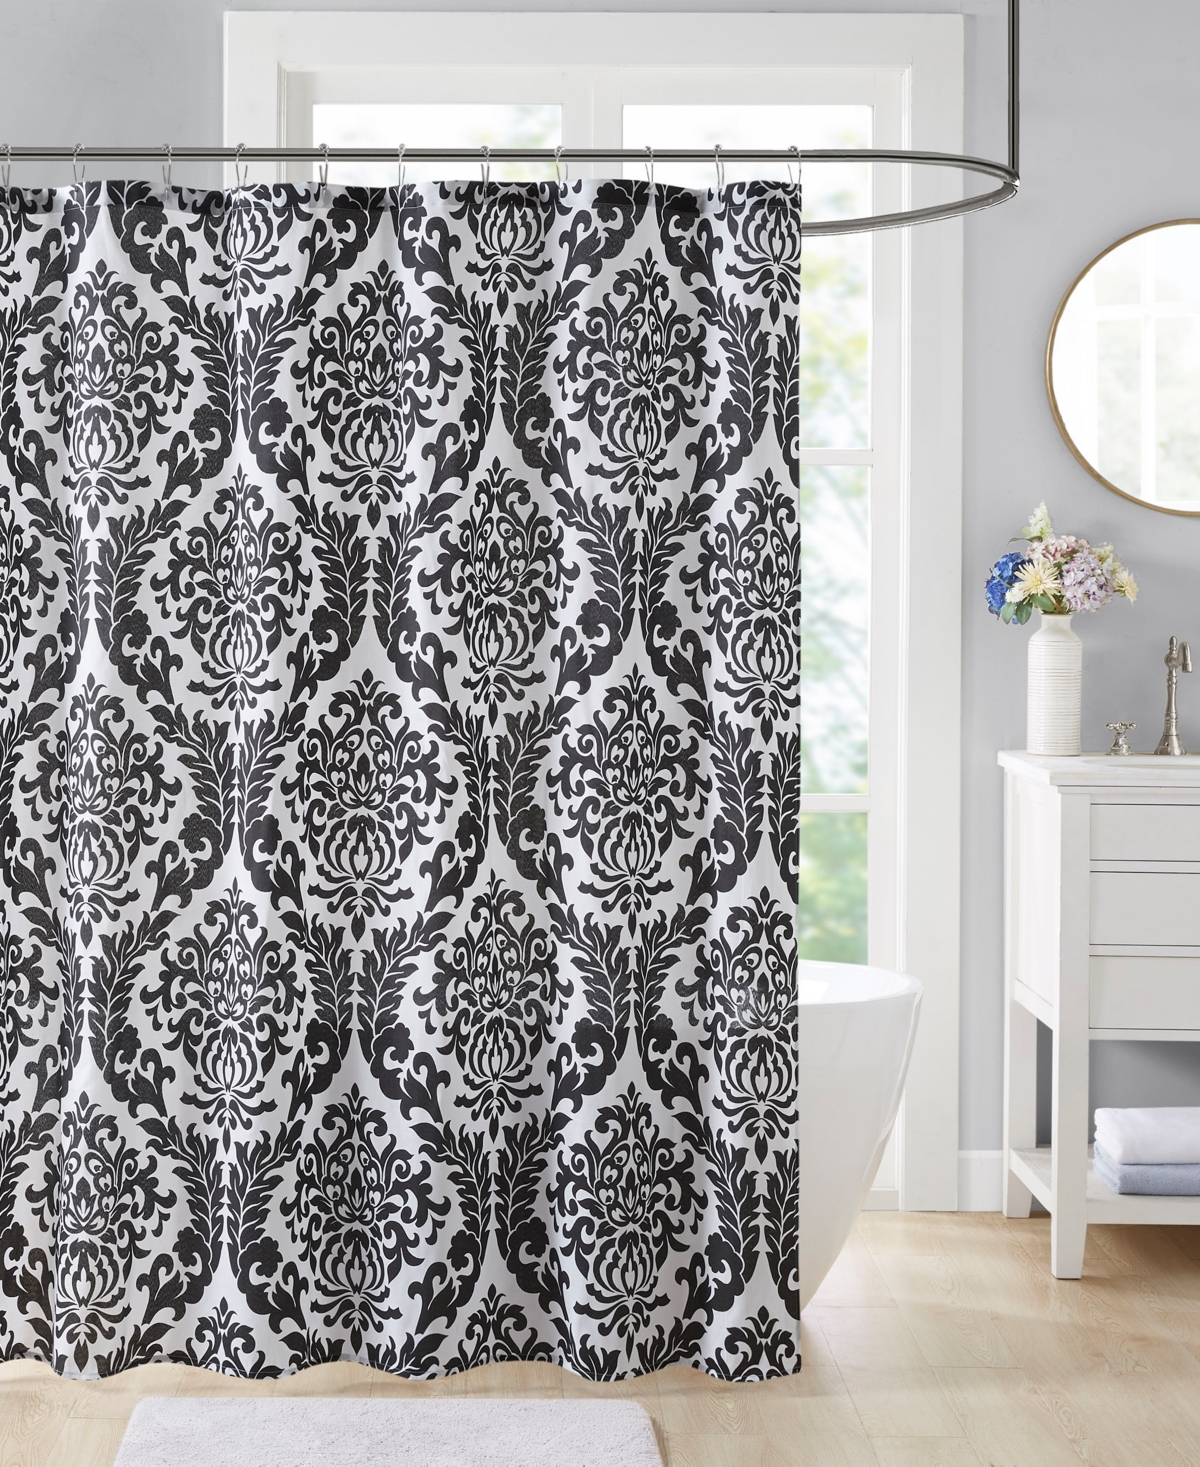 Decor Studio Damask Shower Curtain, 72" X 72" Bedding In Black And White